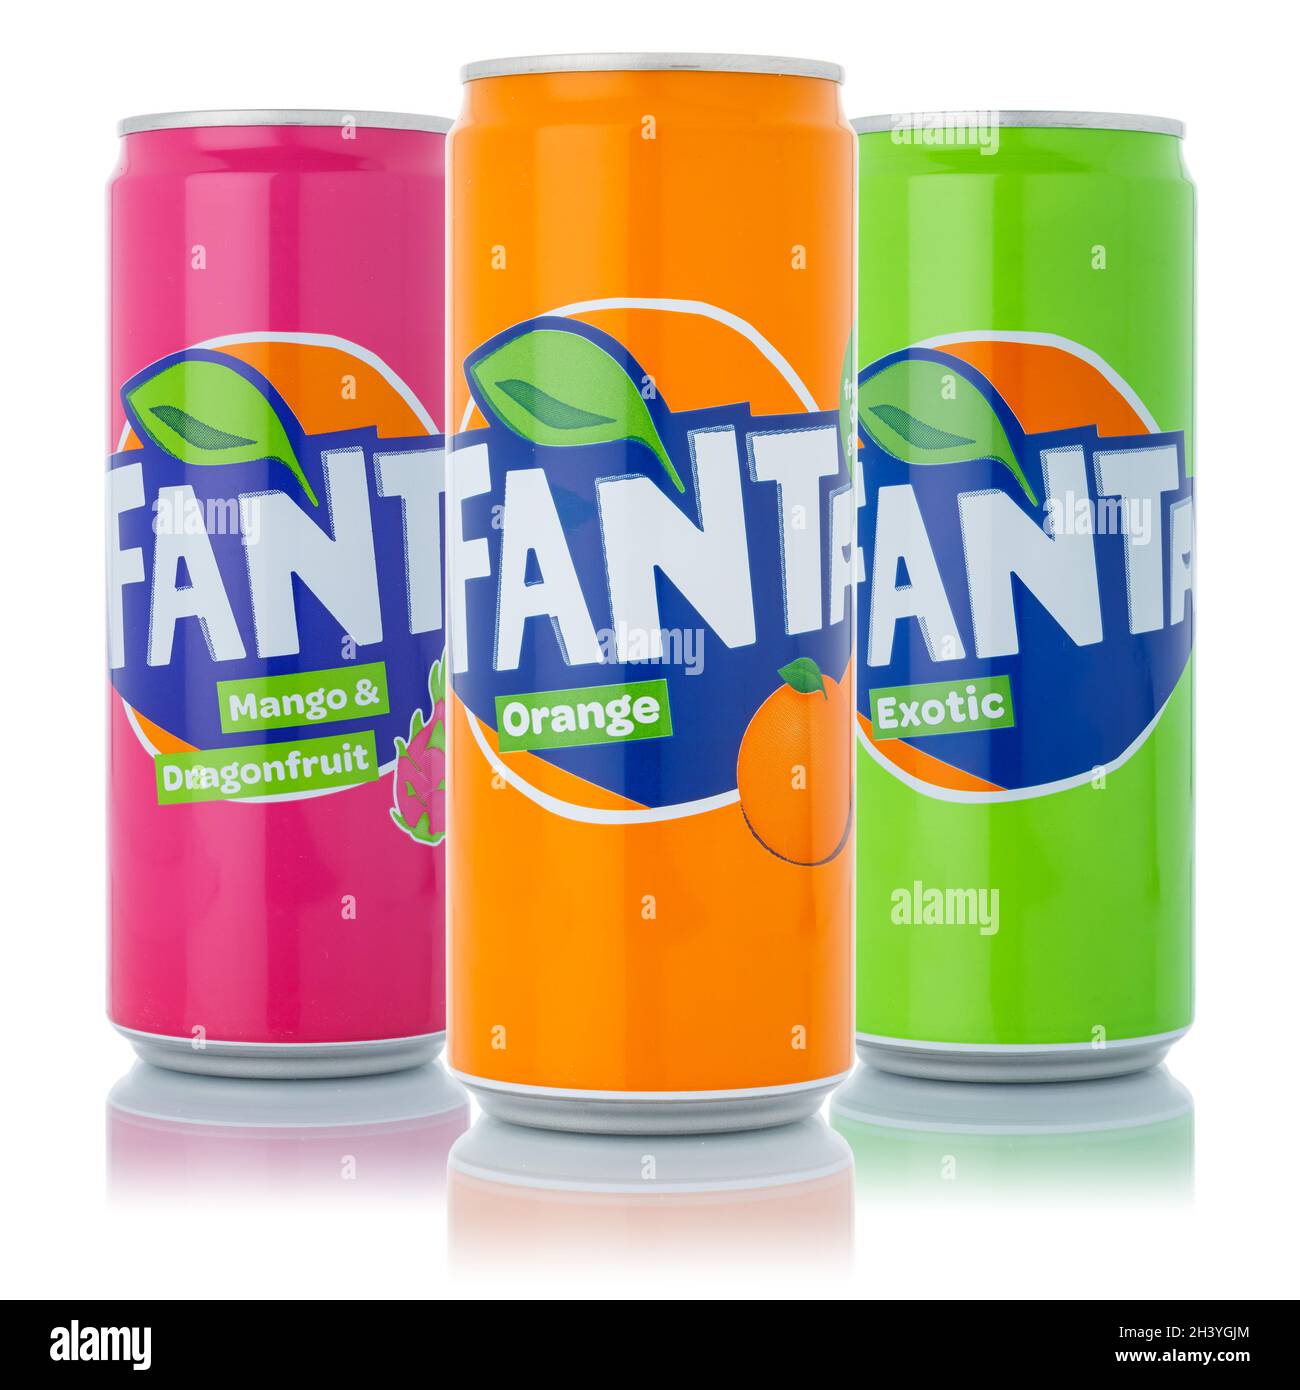 Fanta lemonade soft drink drinks in cans cutout isolated against a white background Stock Photo